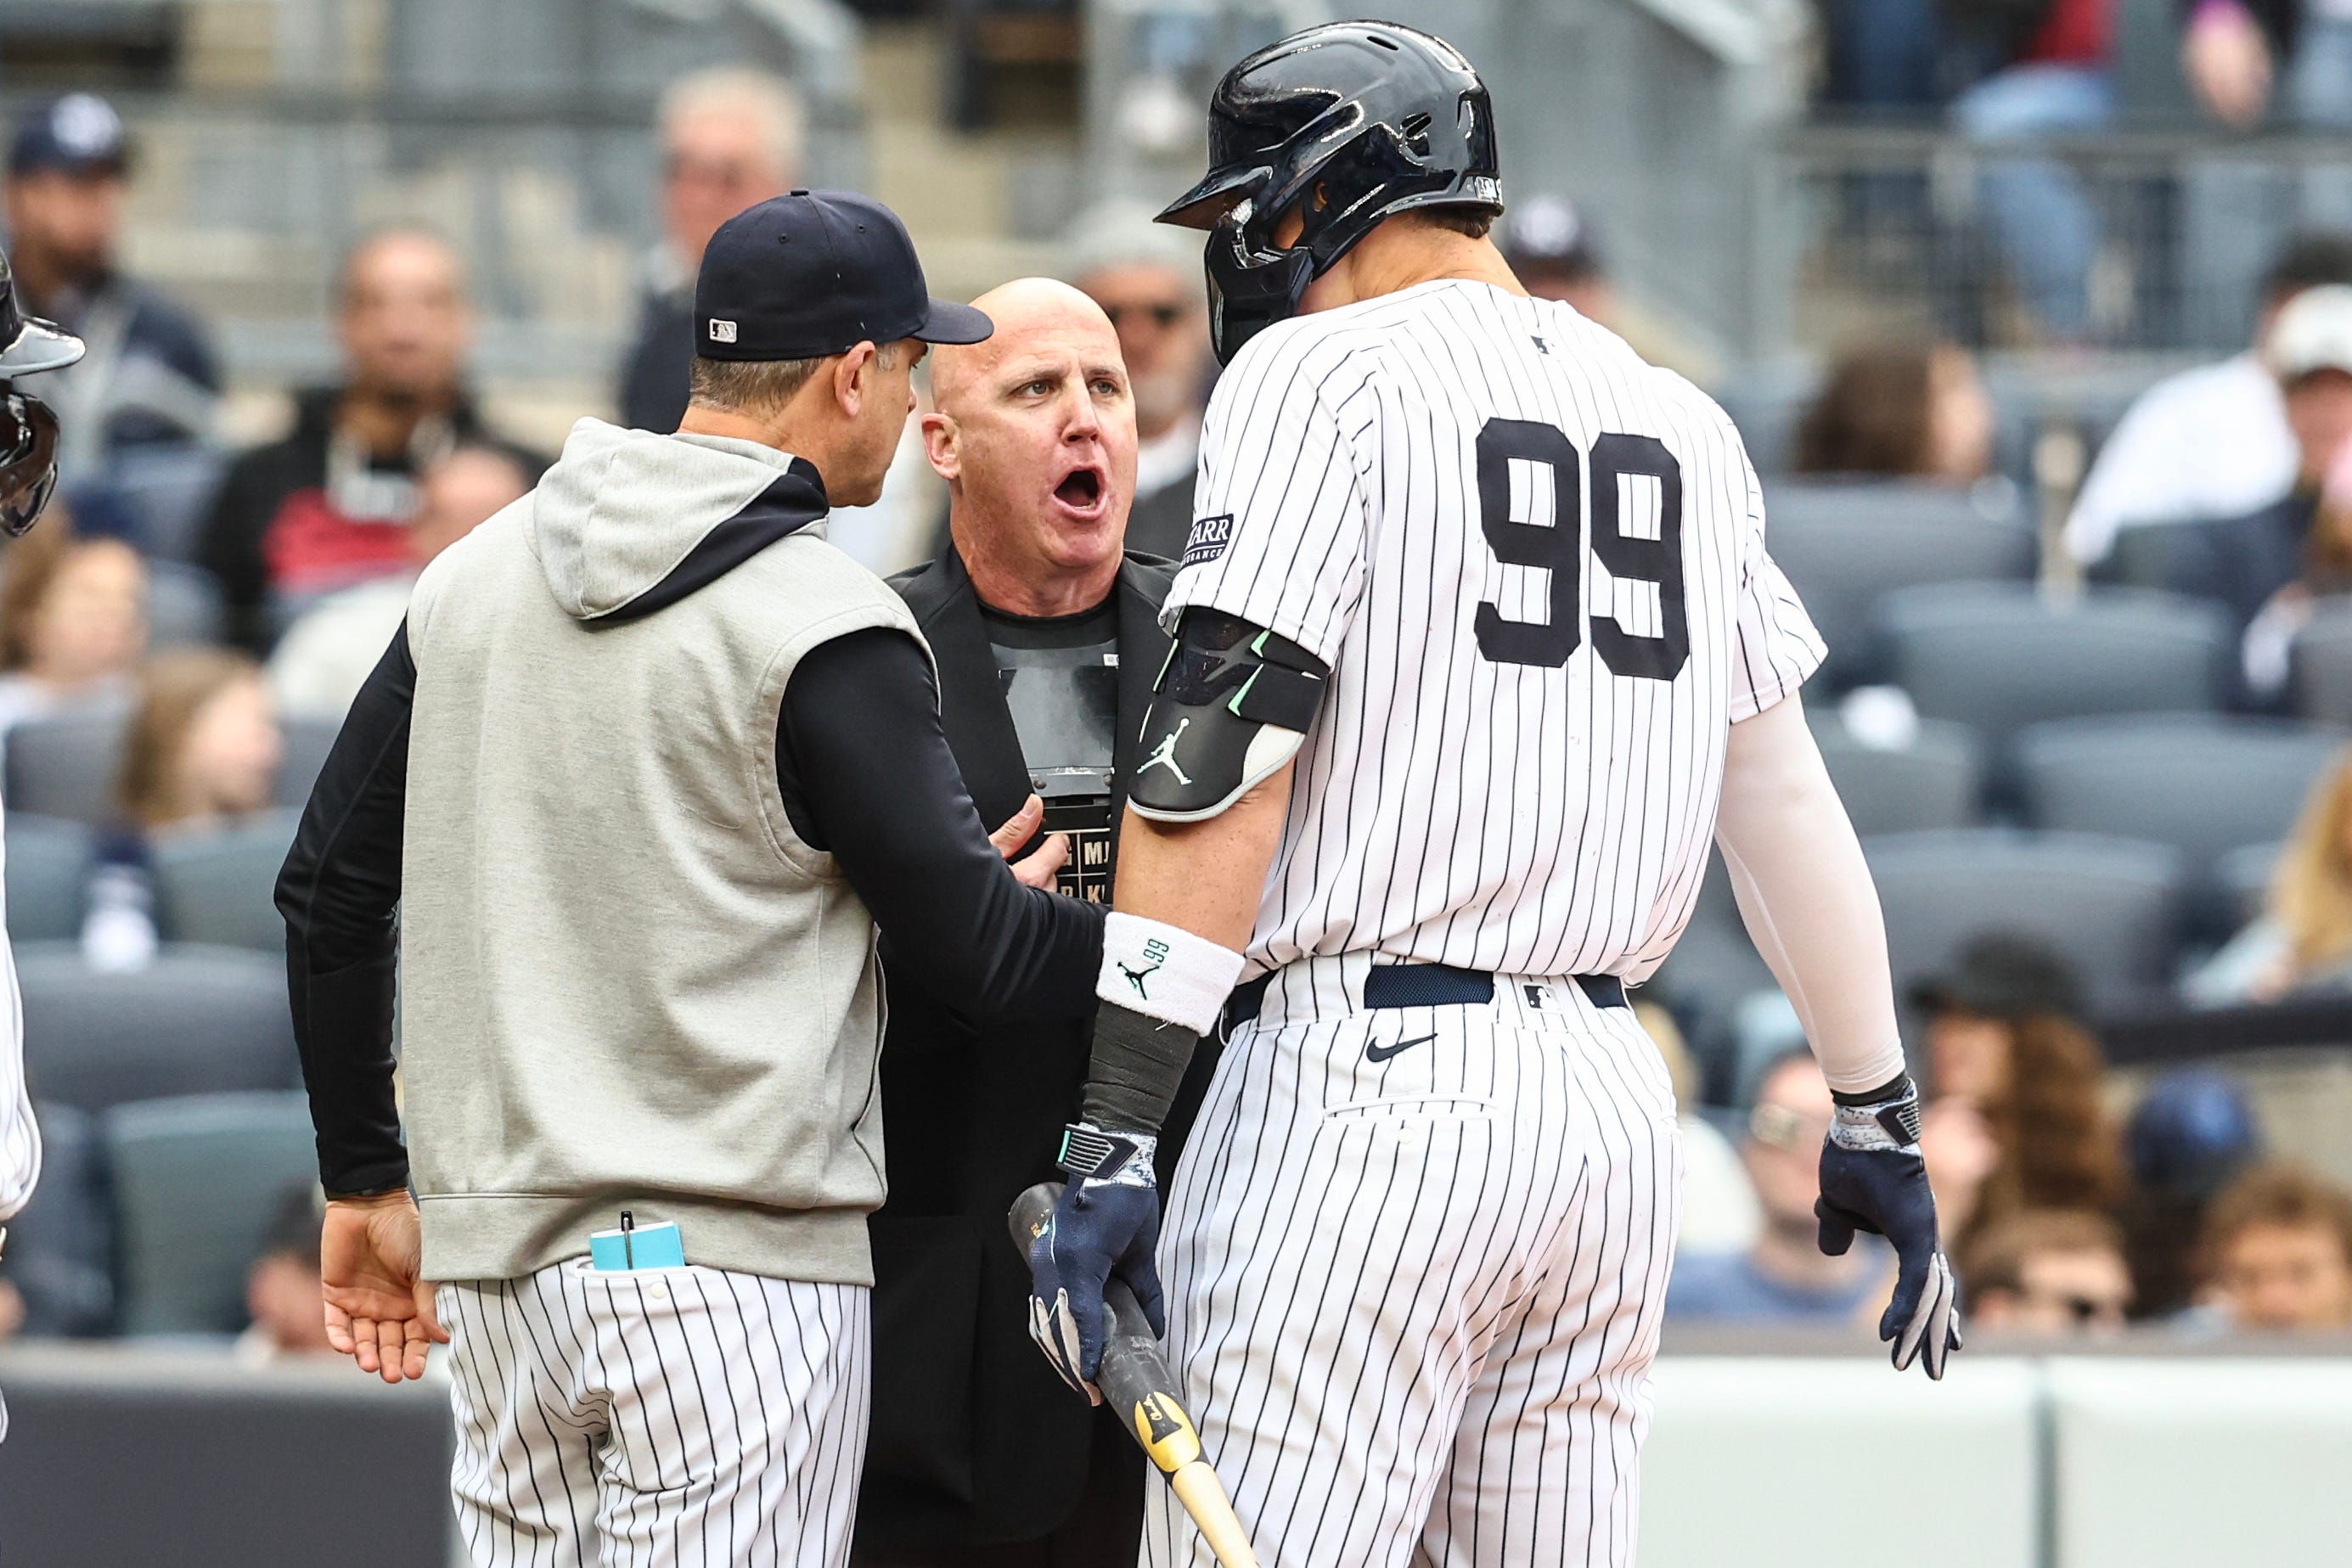 yankees star aaron judge got ejected for the first time in his career